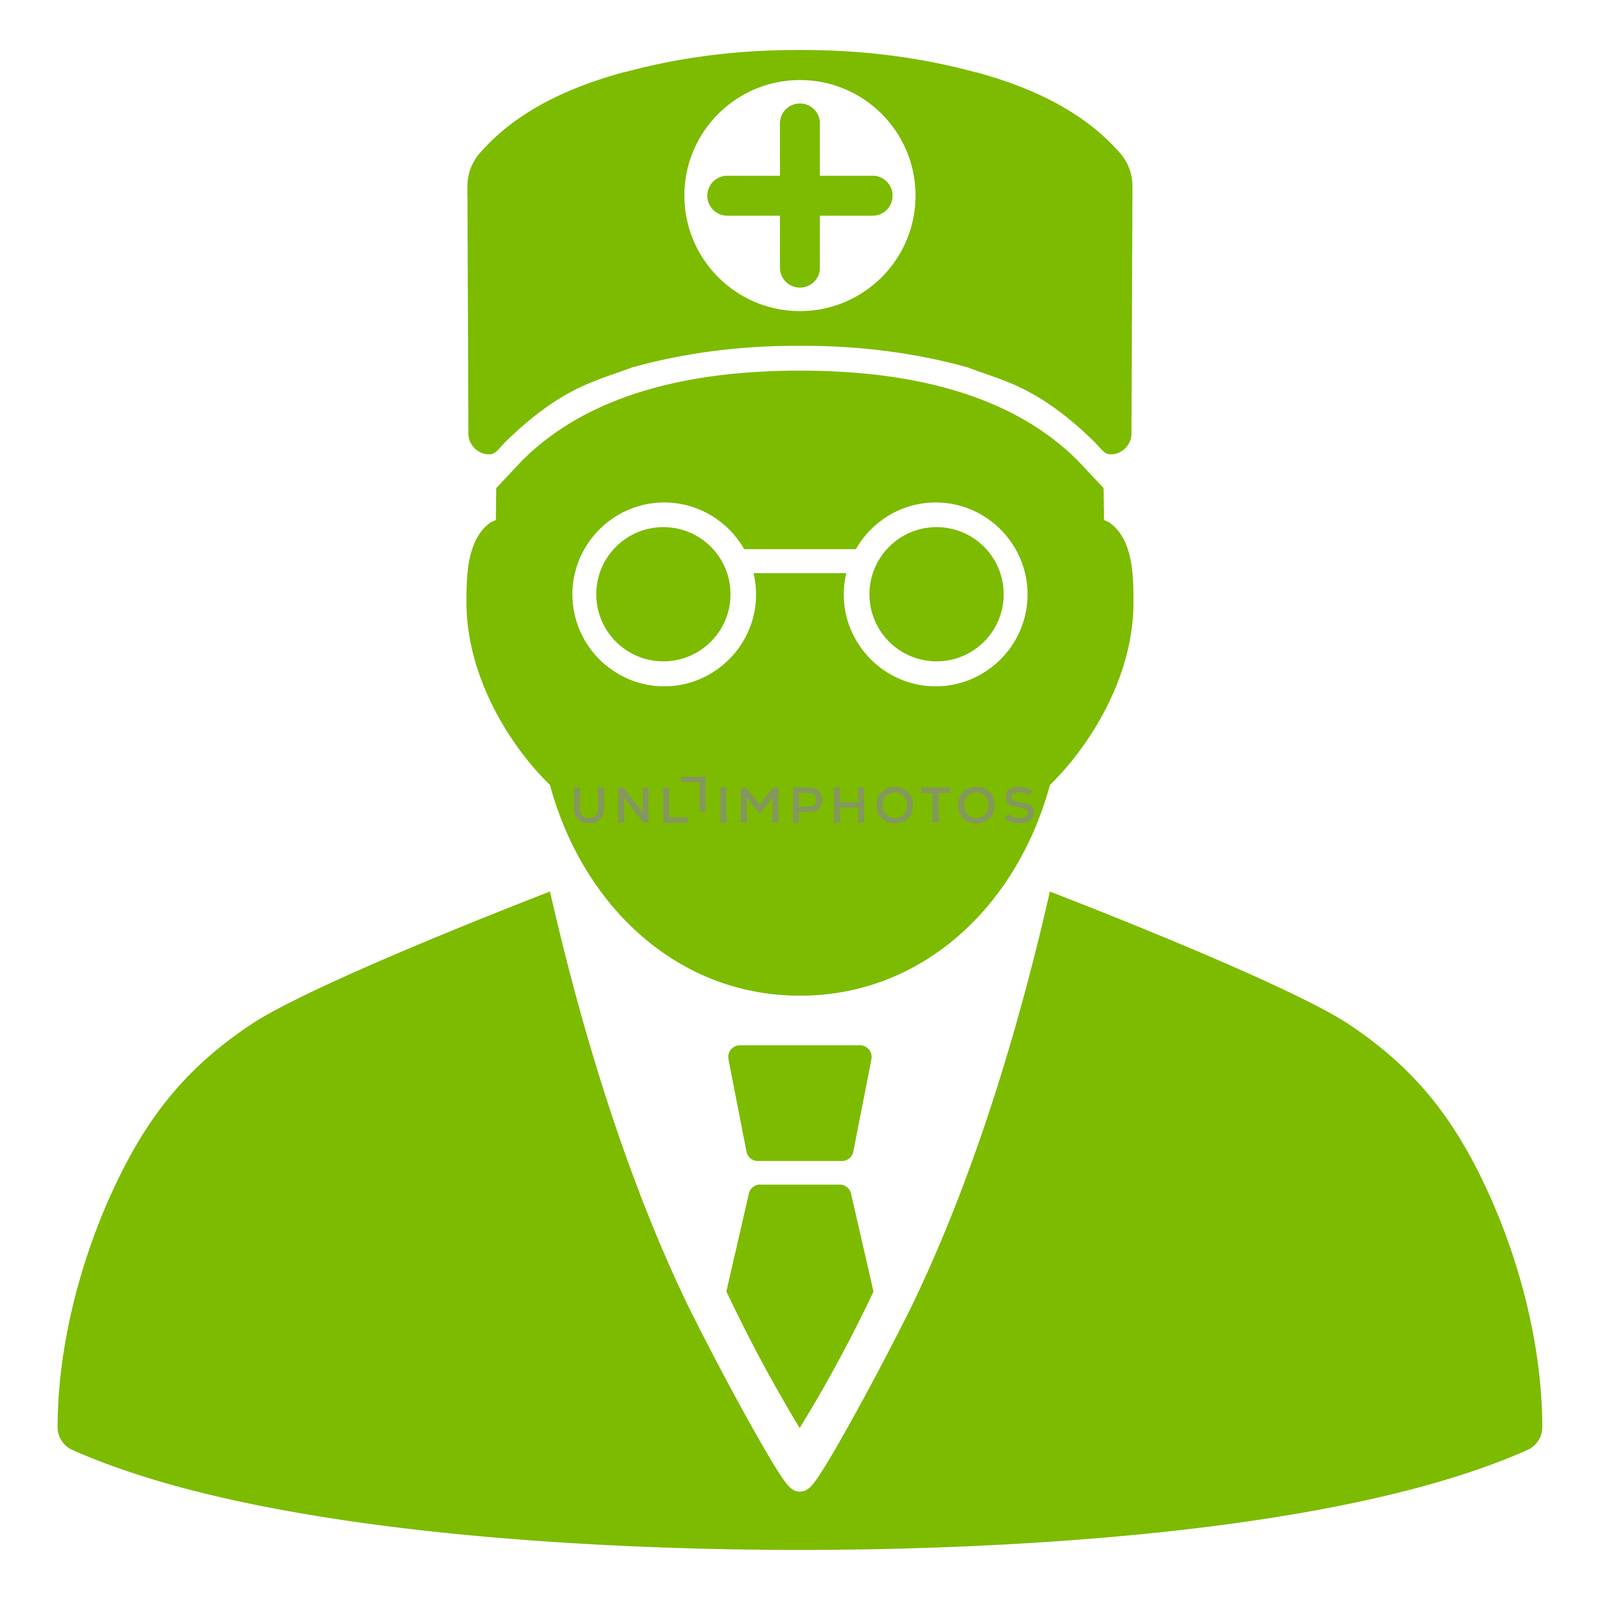 Head Physician raster icon. Style is flat symbol, eco green color, rounded angles, white background.